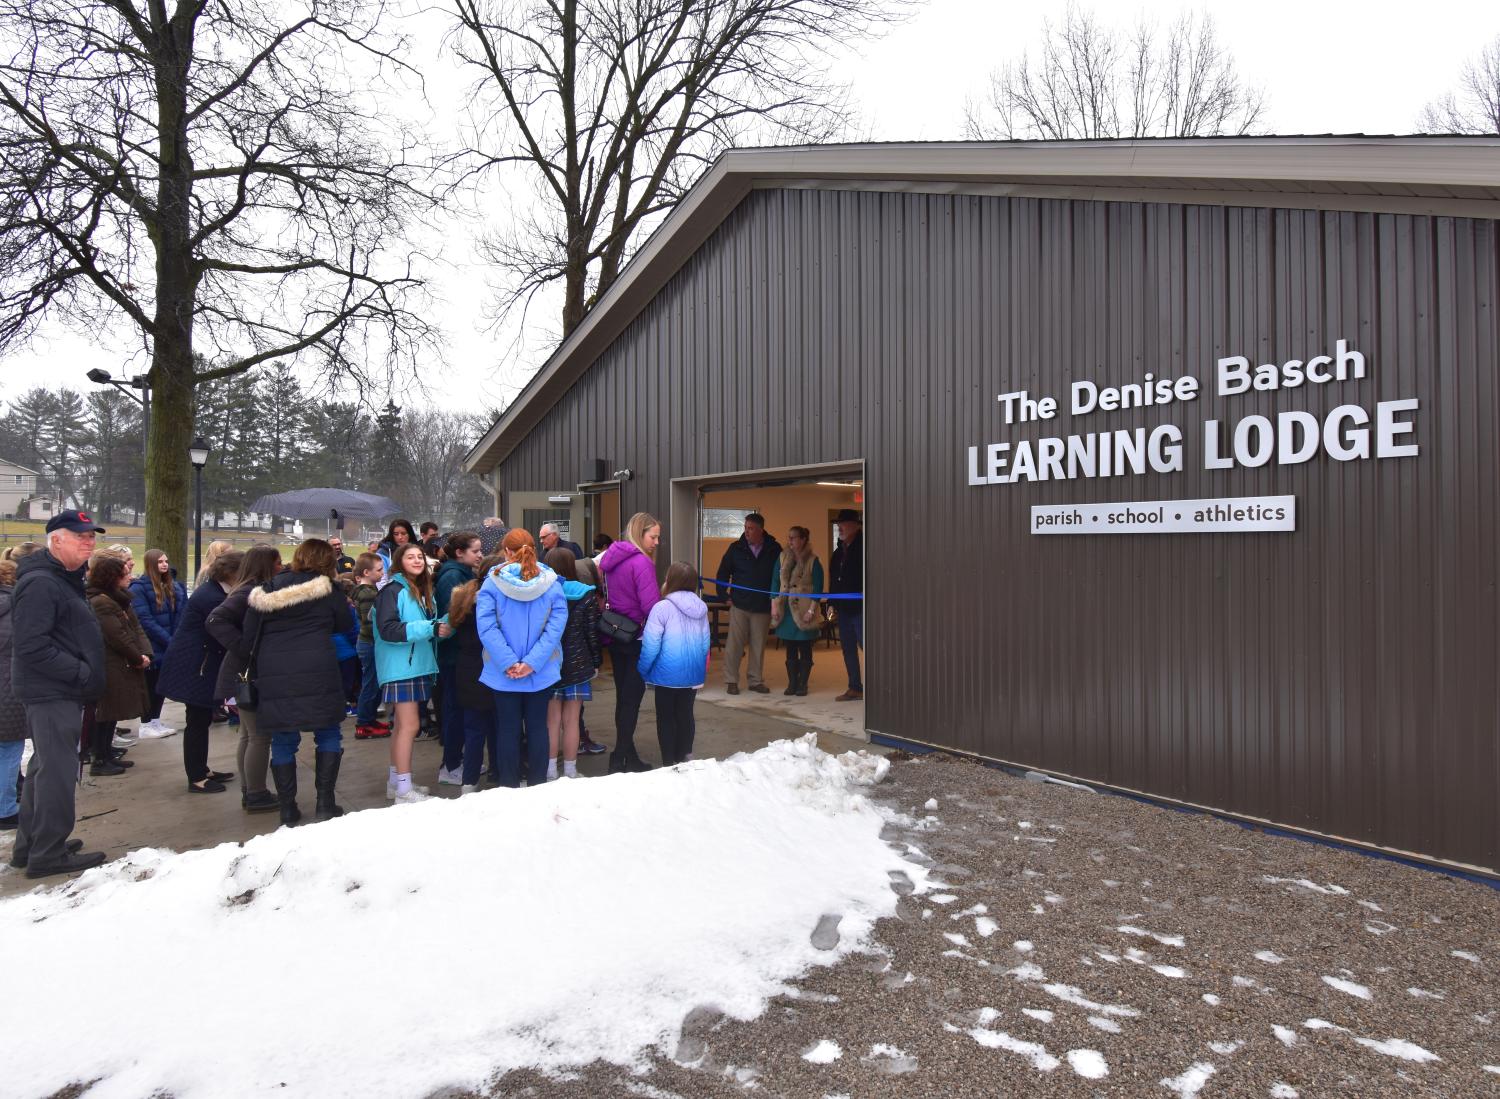 Grand opening of the Learning Lodge